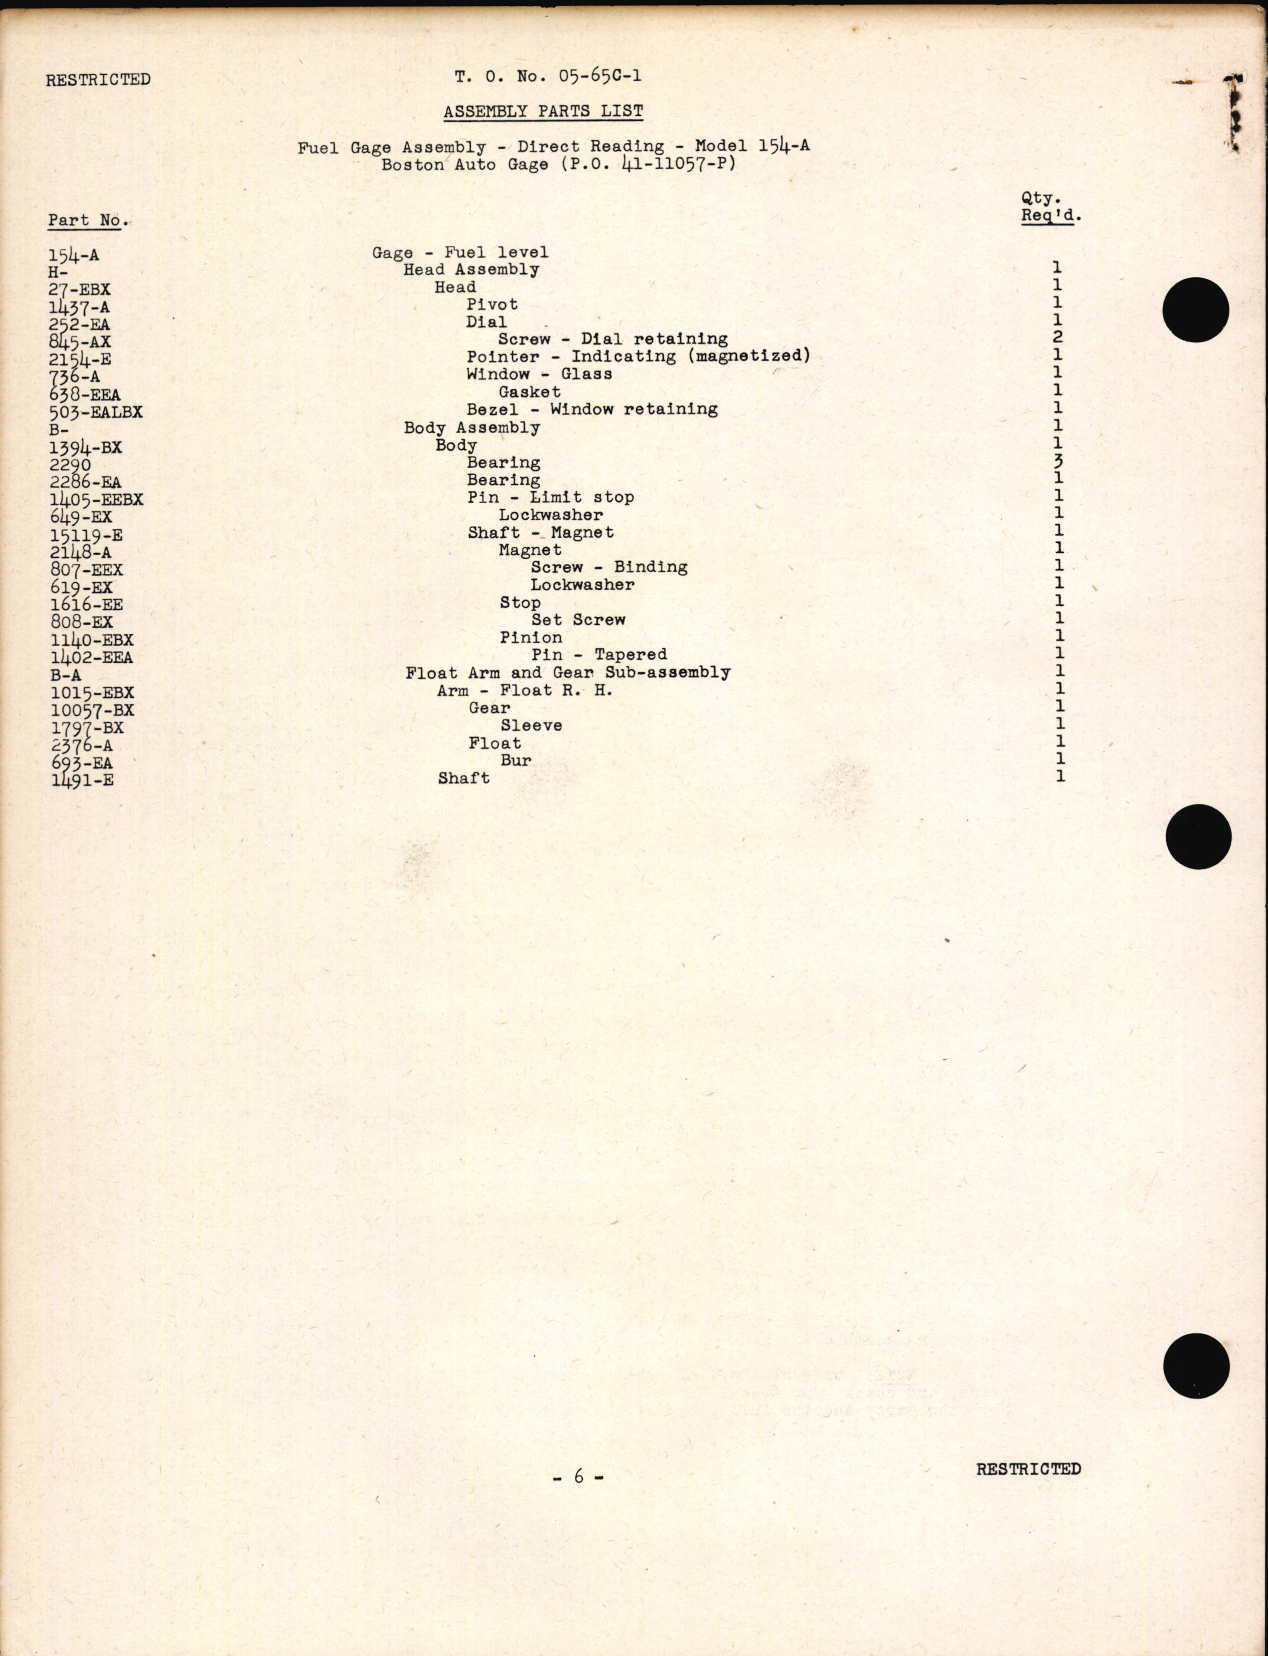 Sample page 8 from AirCorps Library document: Handbook of Instructions with Assembly Parts List for Direct Reading Fuel Gage Model 154-A